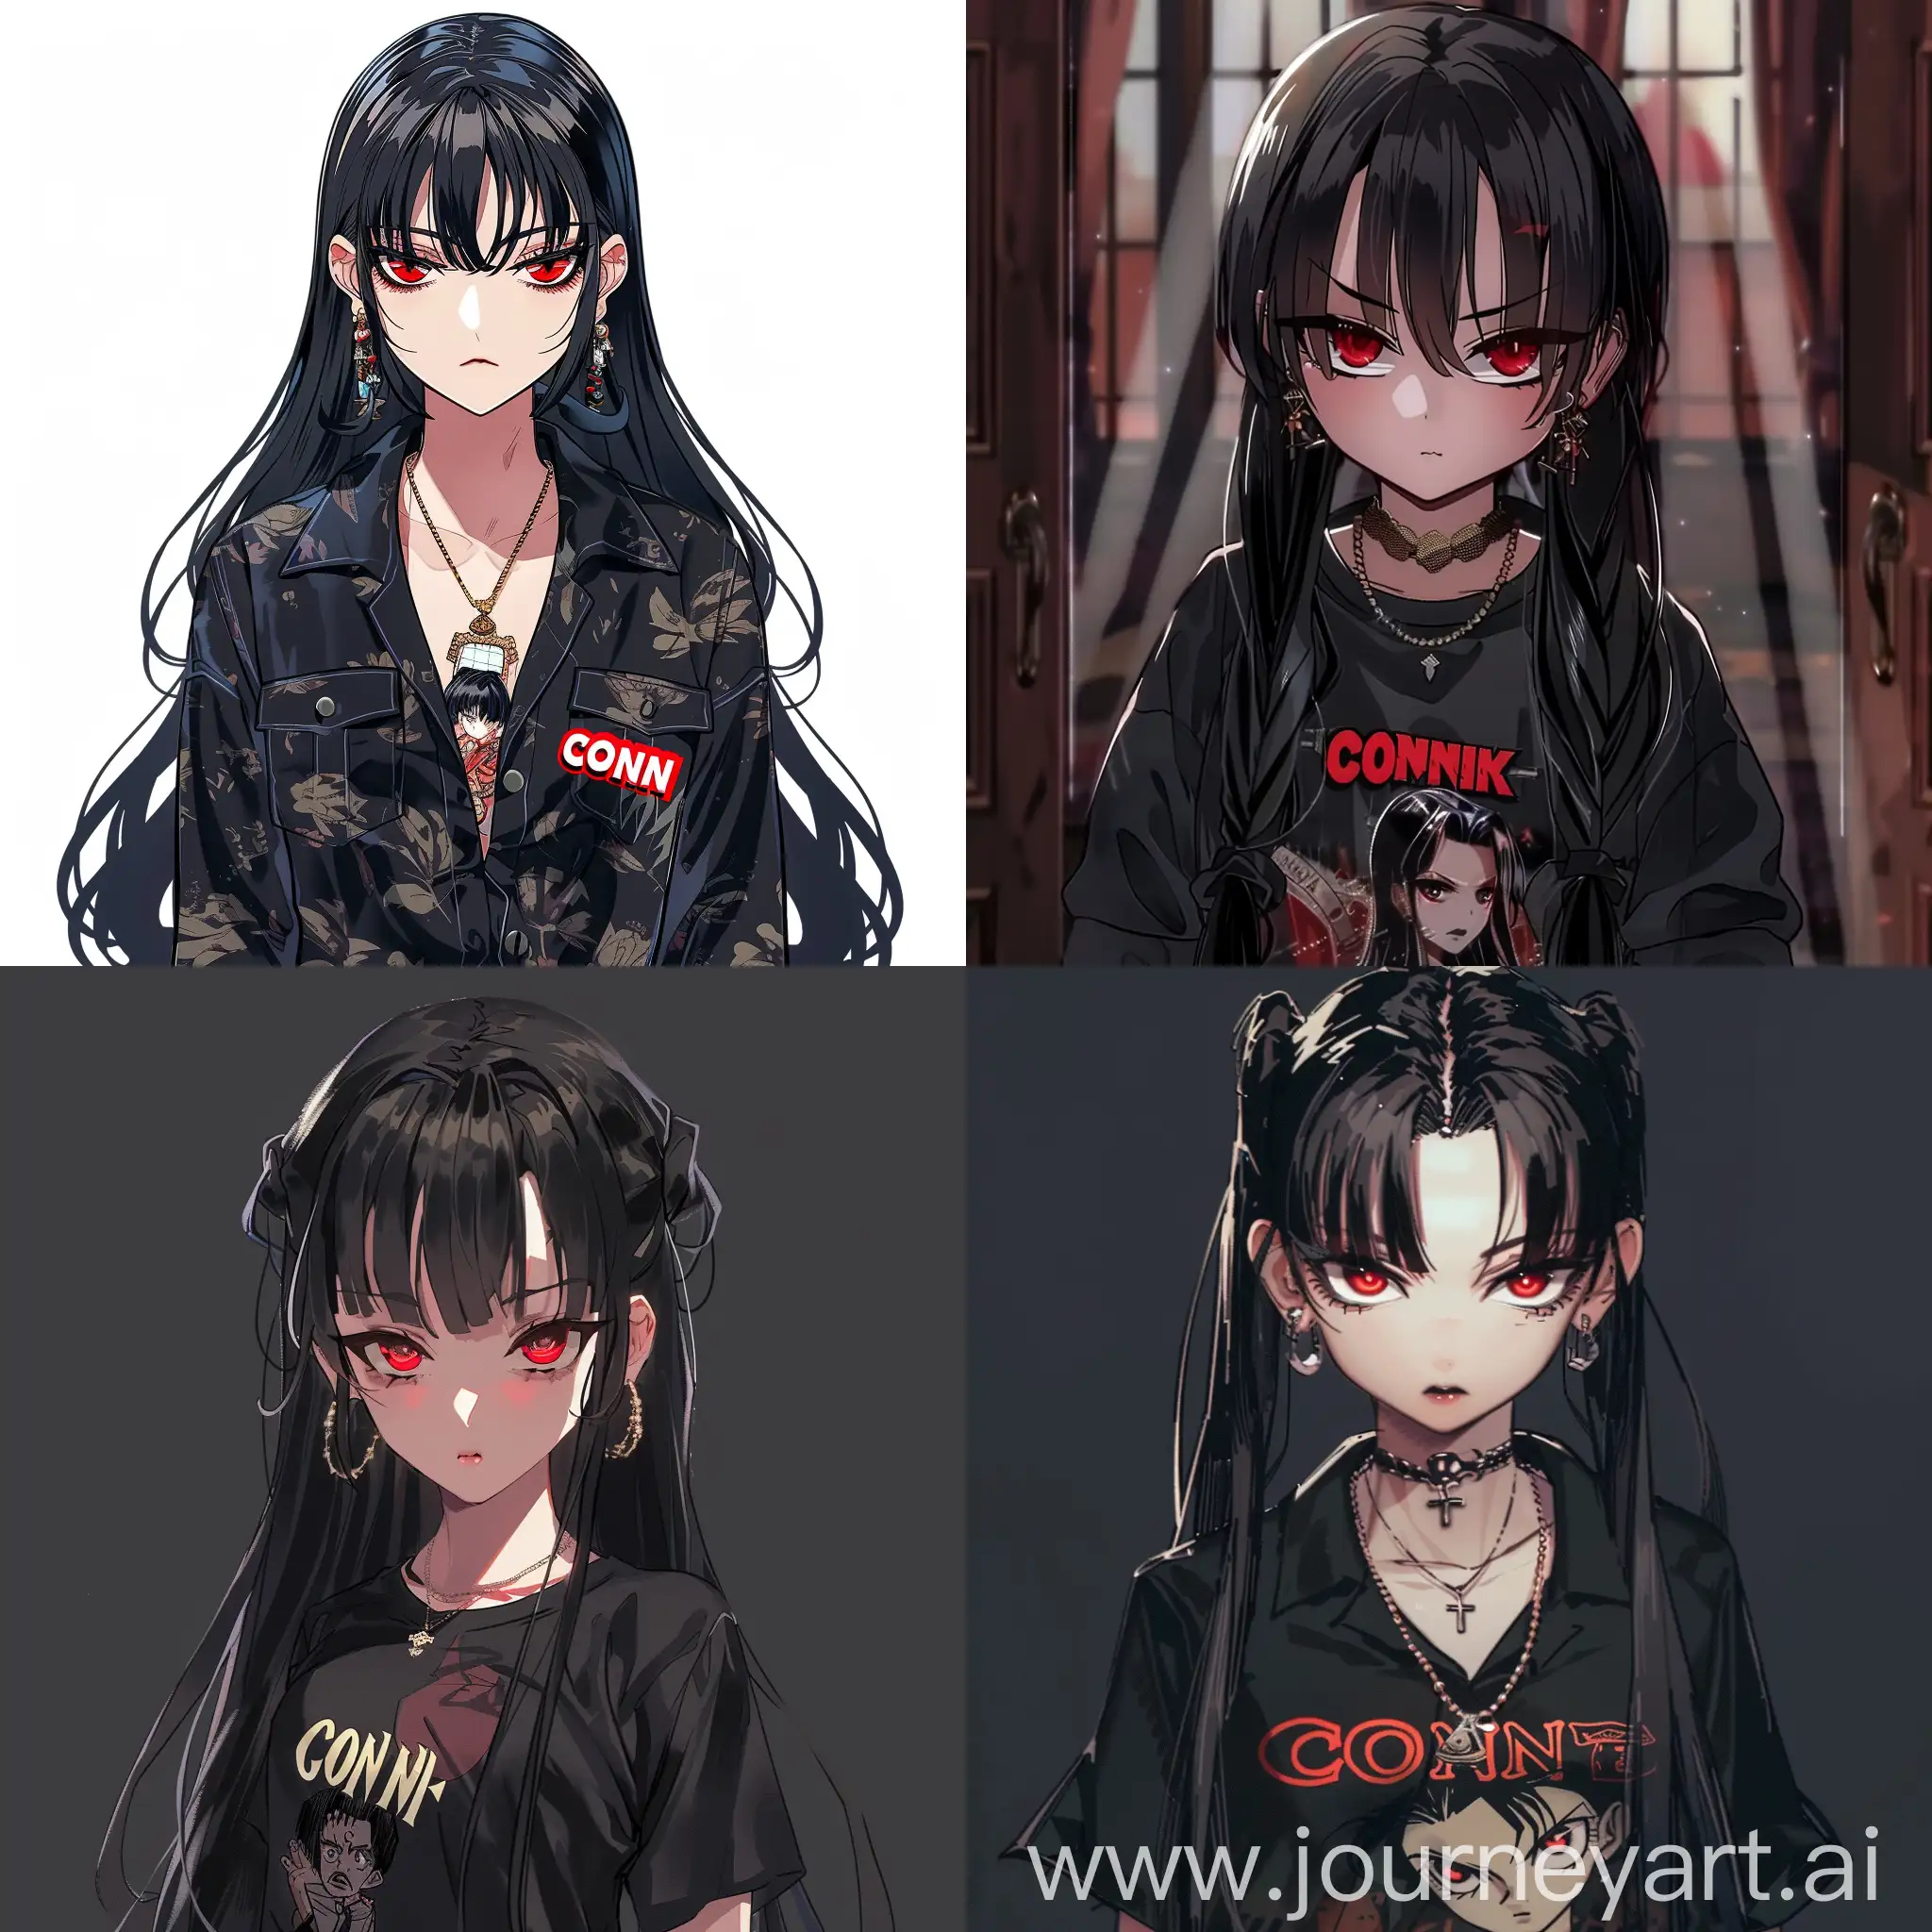 Mysterious-Girl-with-Long-Black-Hair-and-Red-Eyes-in-Conanthemed-Mafia-Attire